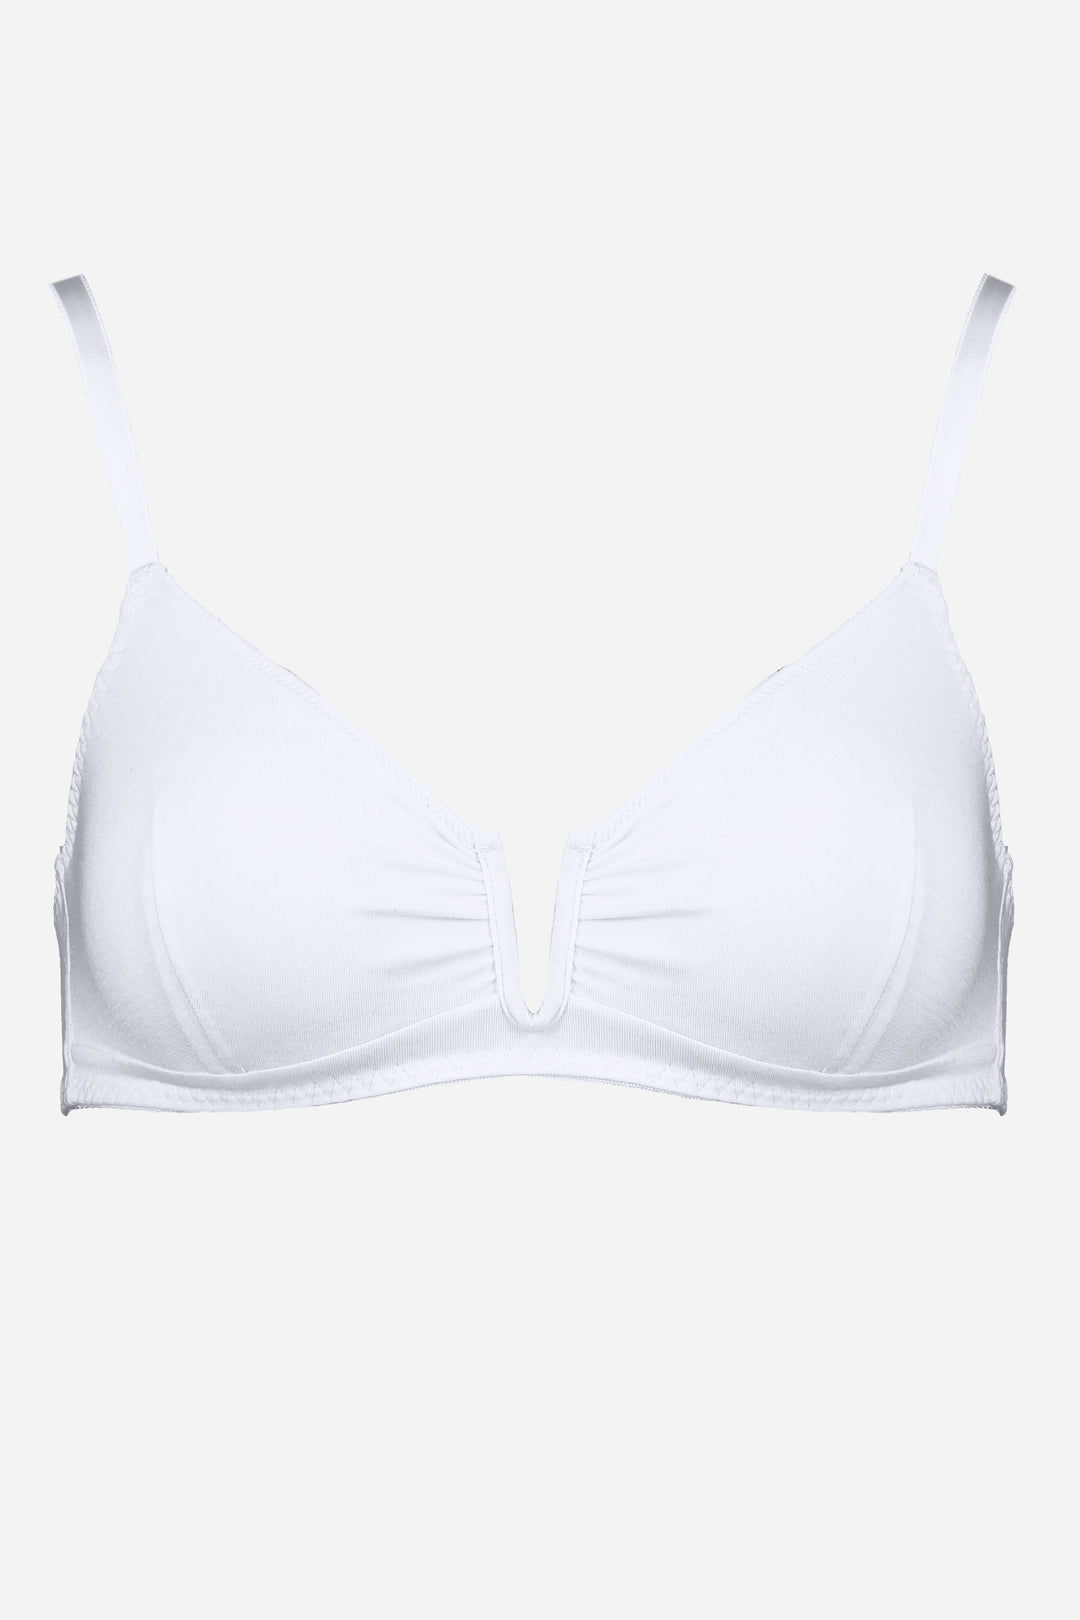 Videris Lingerie Angela underwire free soft cup bra in white TENCEL™ has a triangle shaped cup and U wire in the front